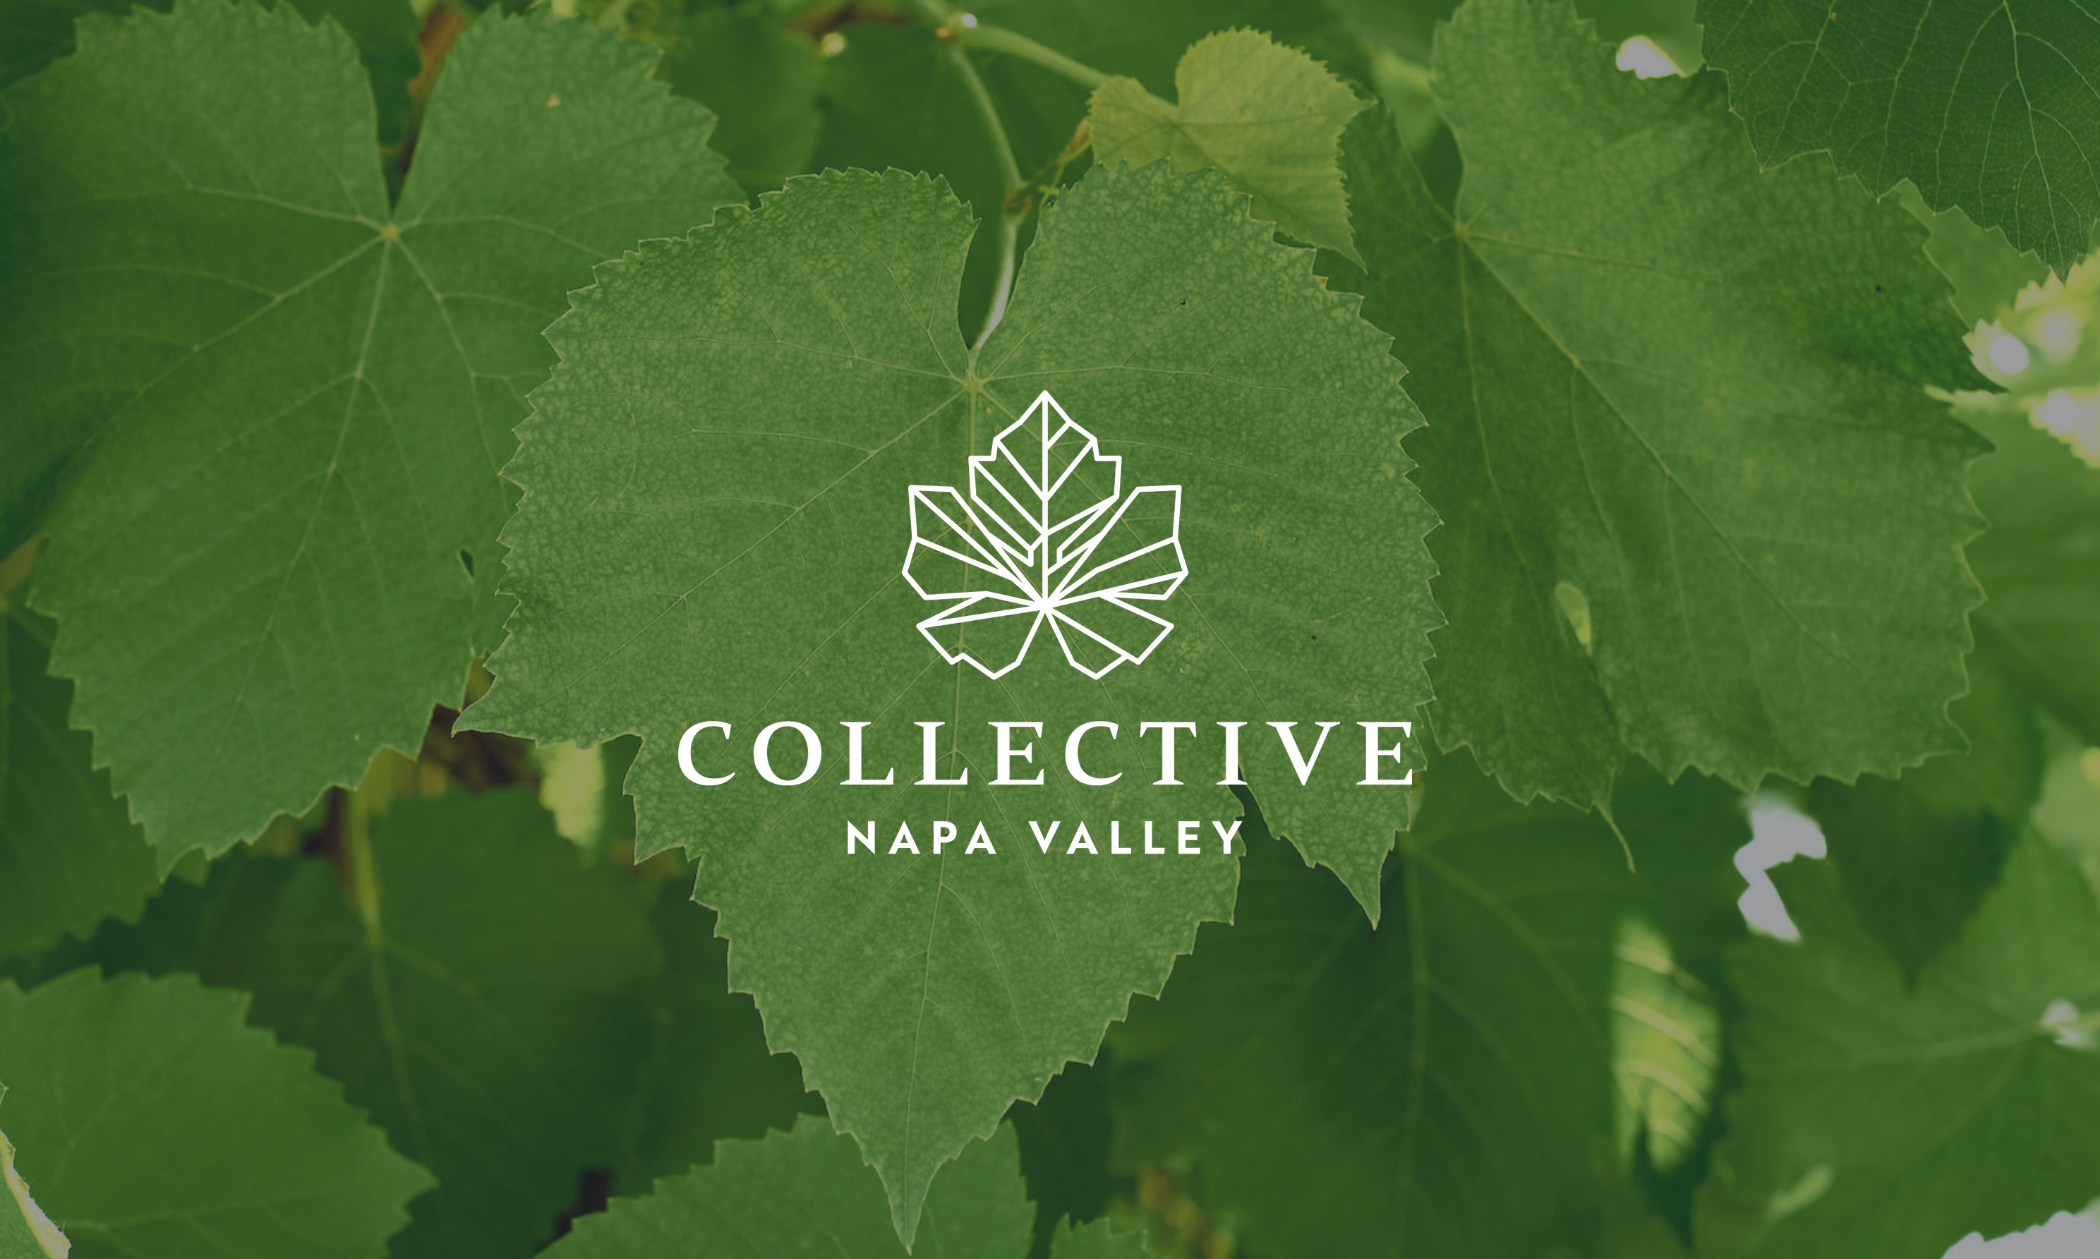 We are unveiling Collective Napa Valley, starting now Napa Valley